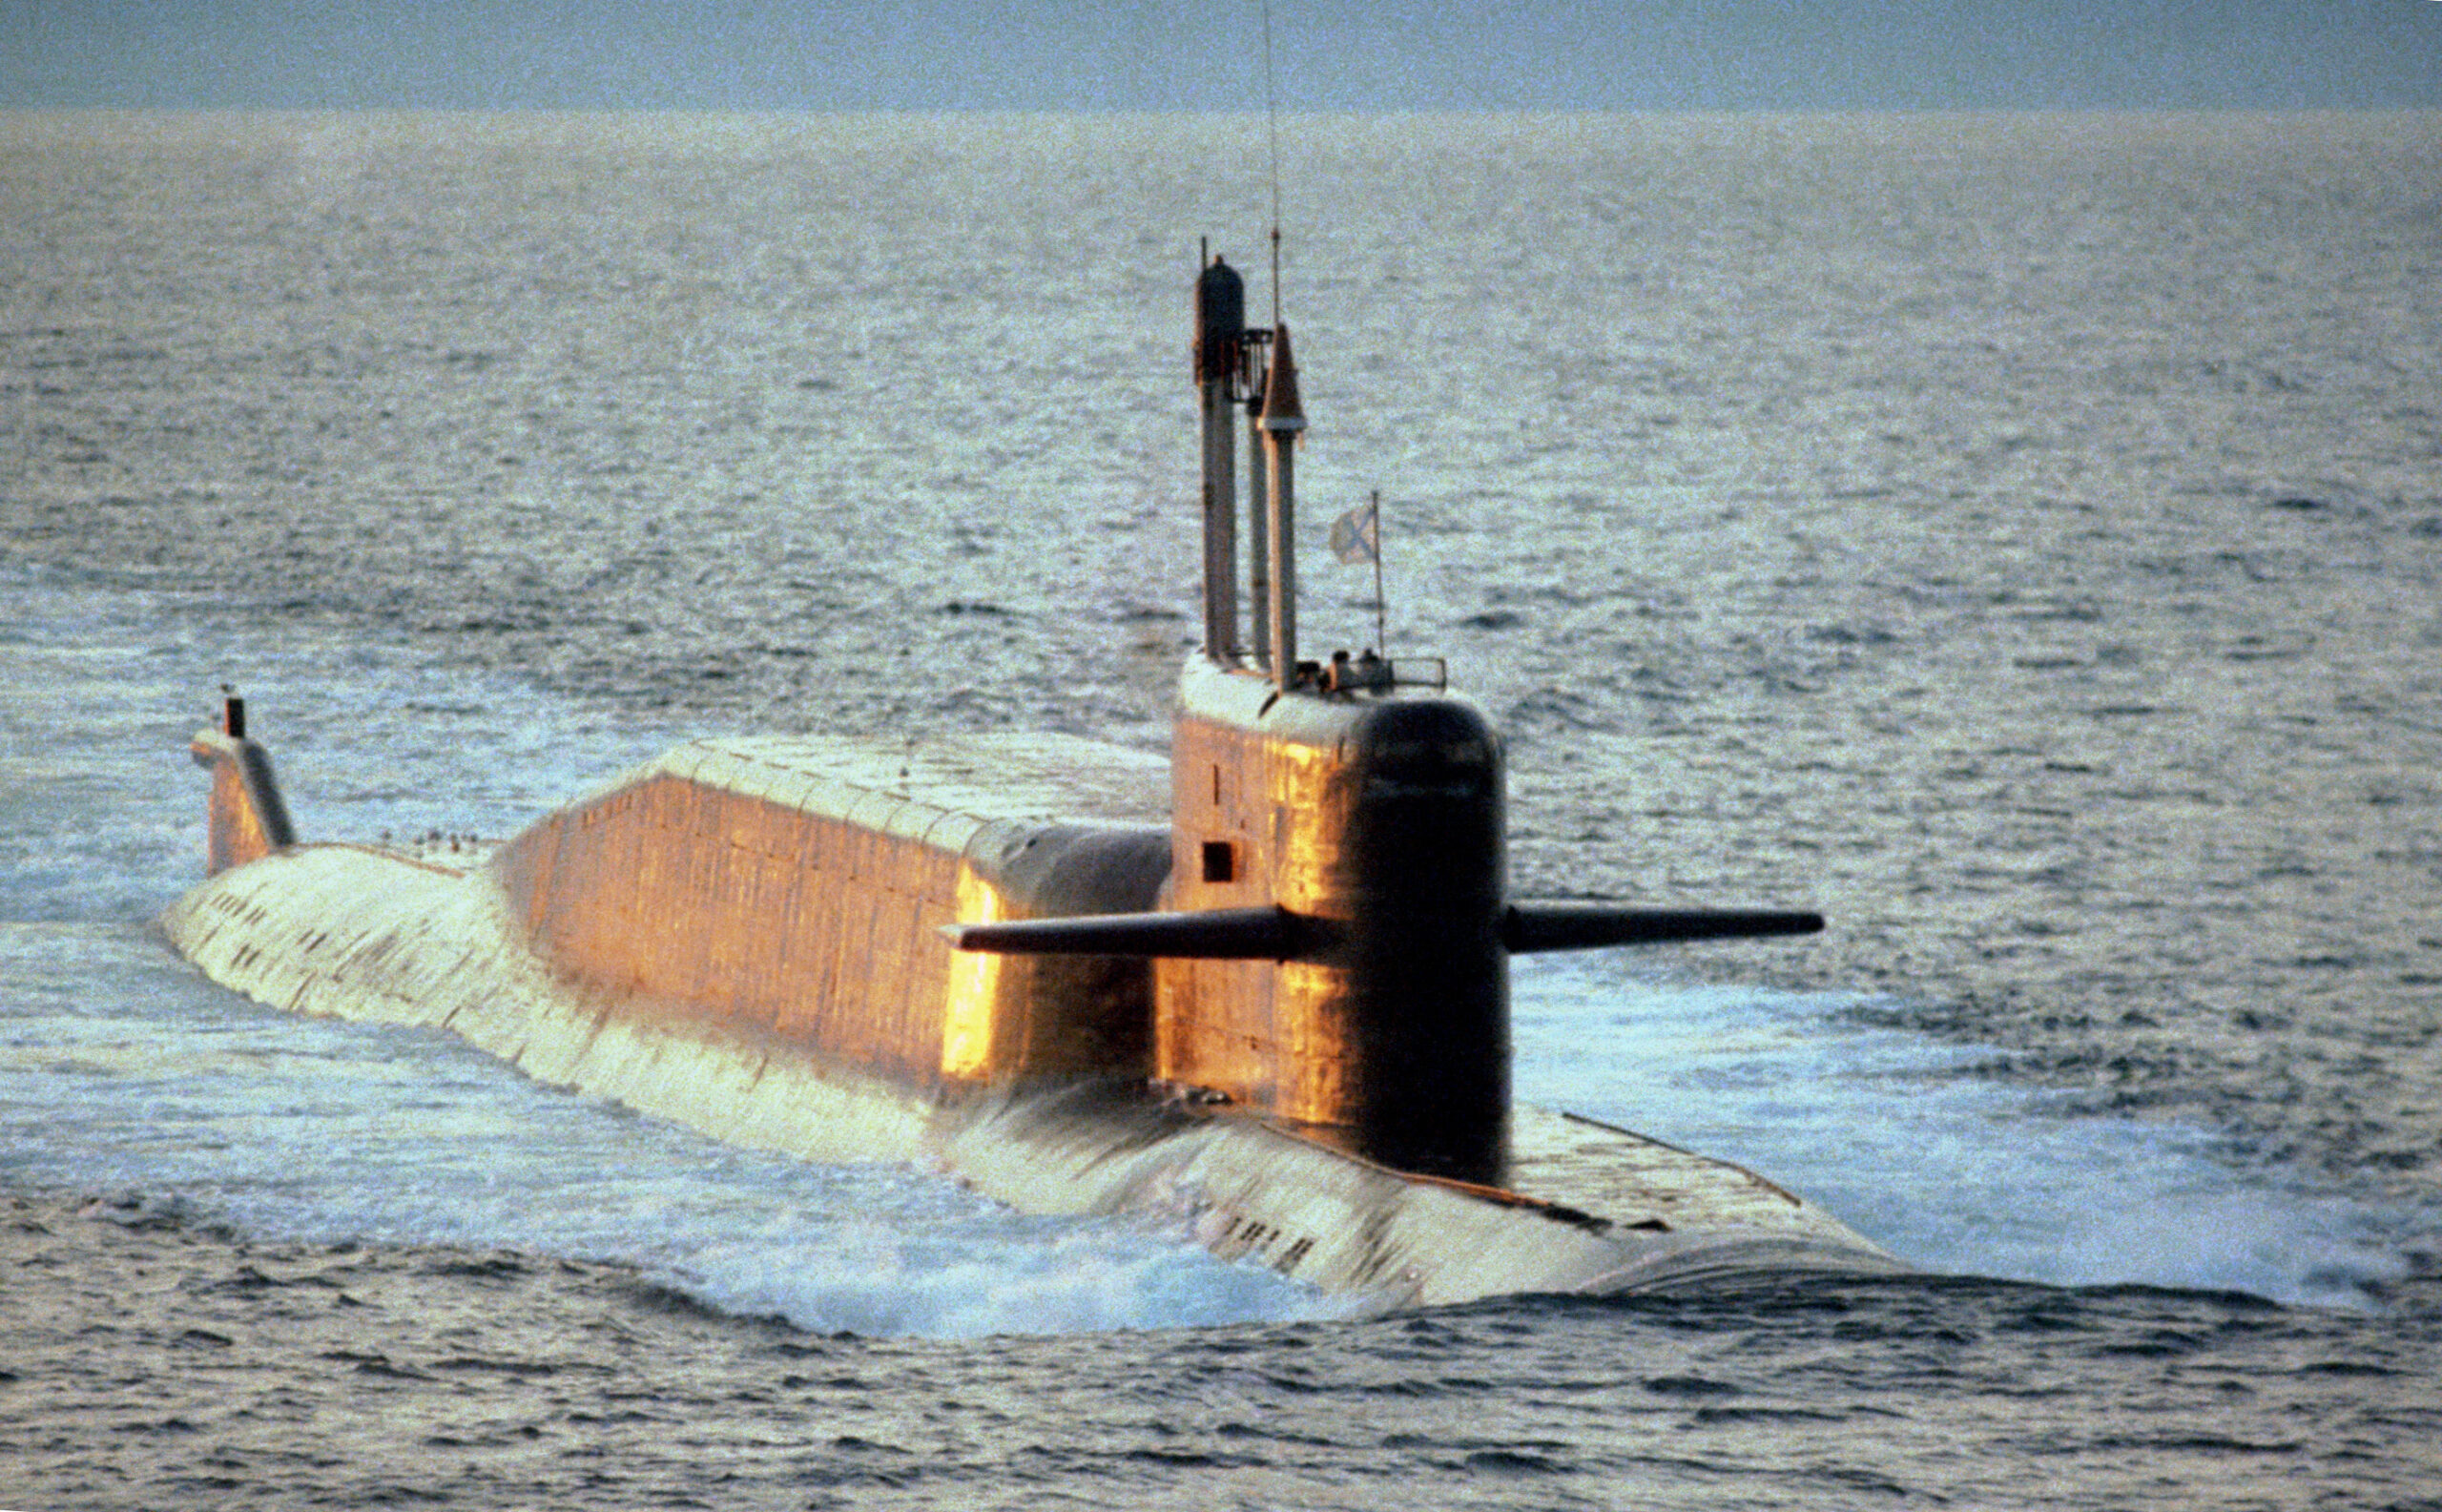 2021-02-04 11:22:20 | Russian Navy nuclear submarine officer punished over drunken outburst